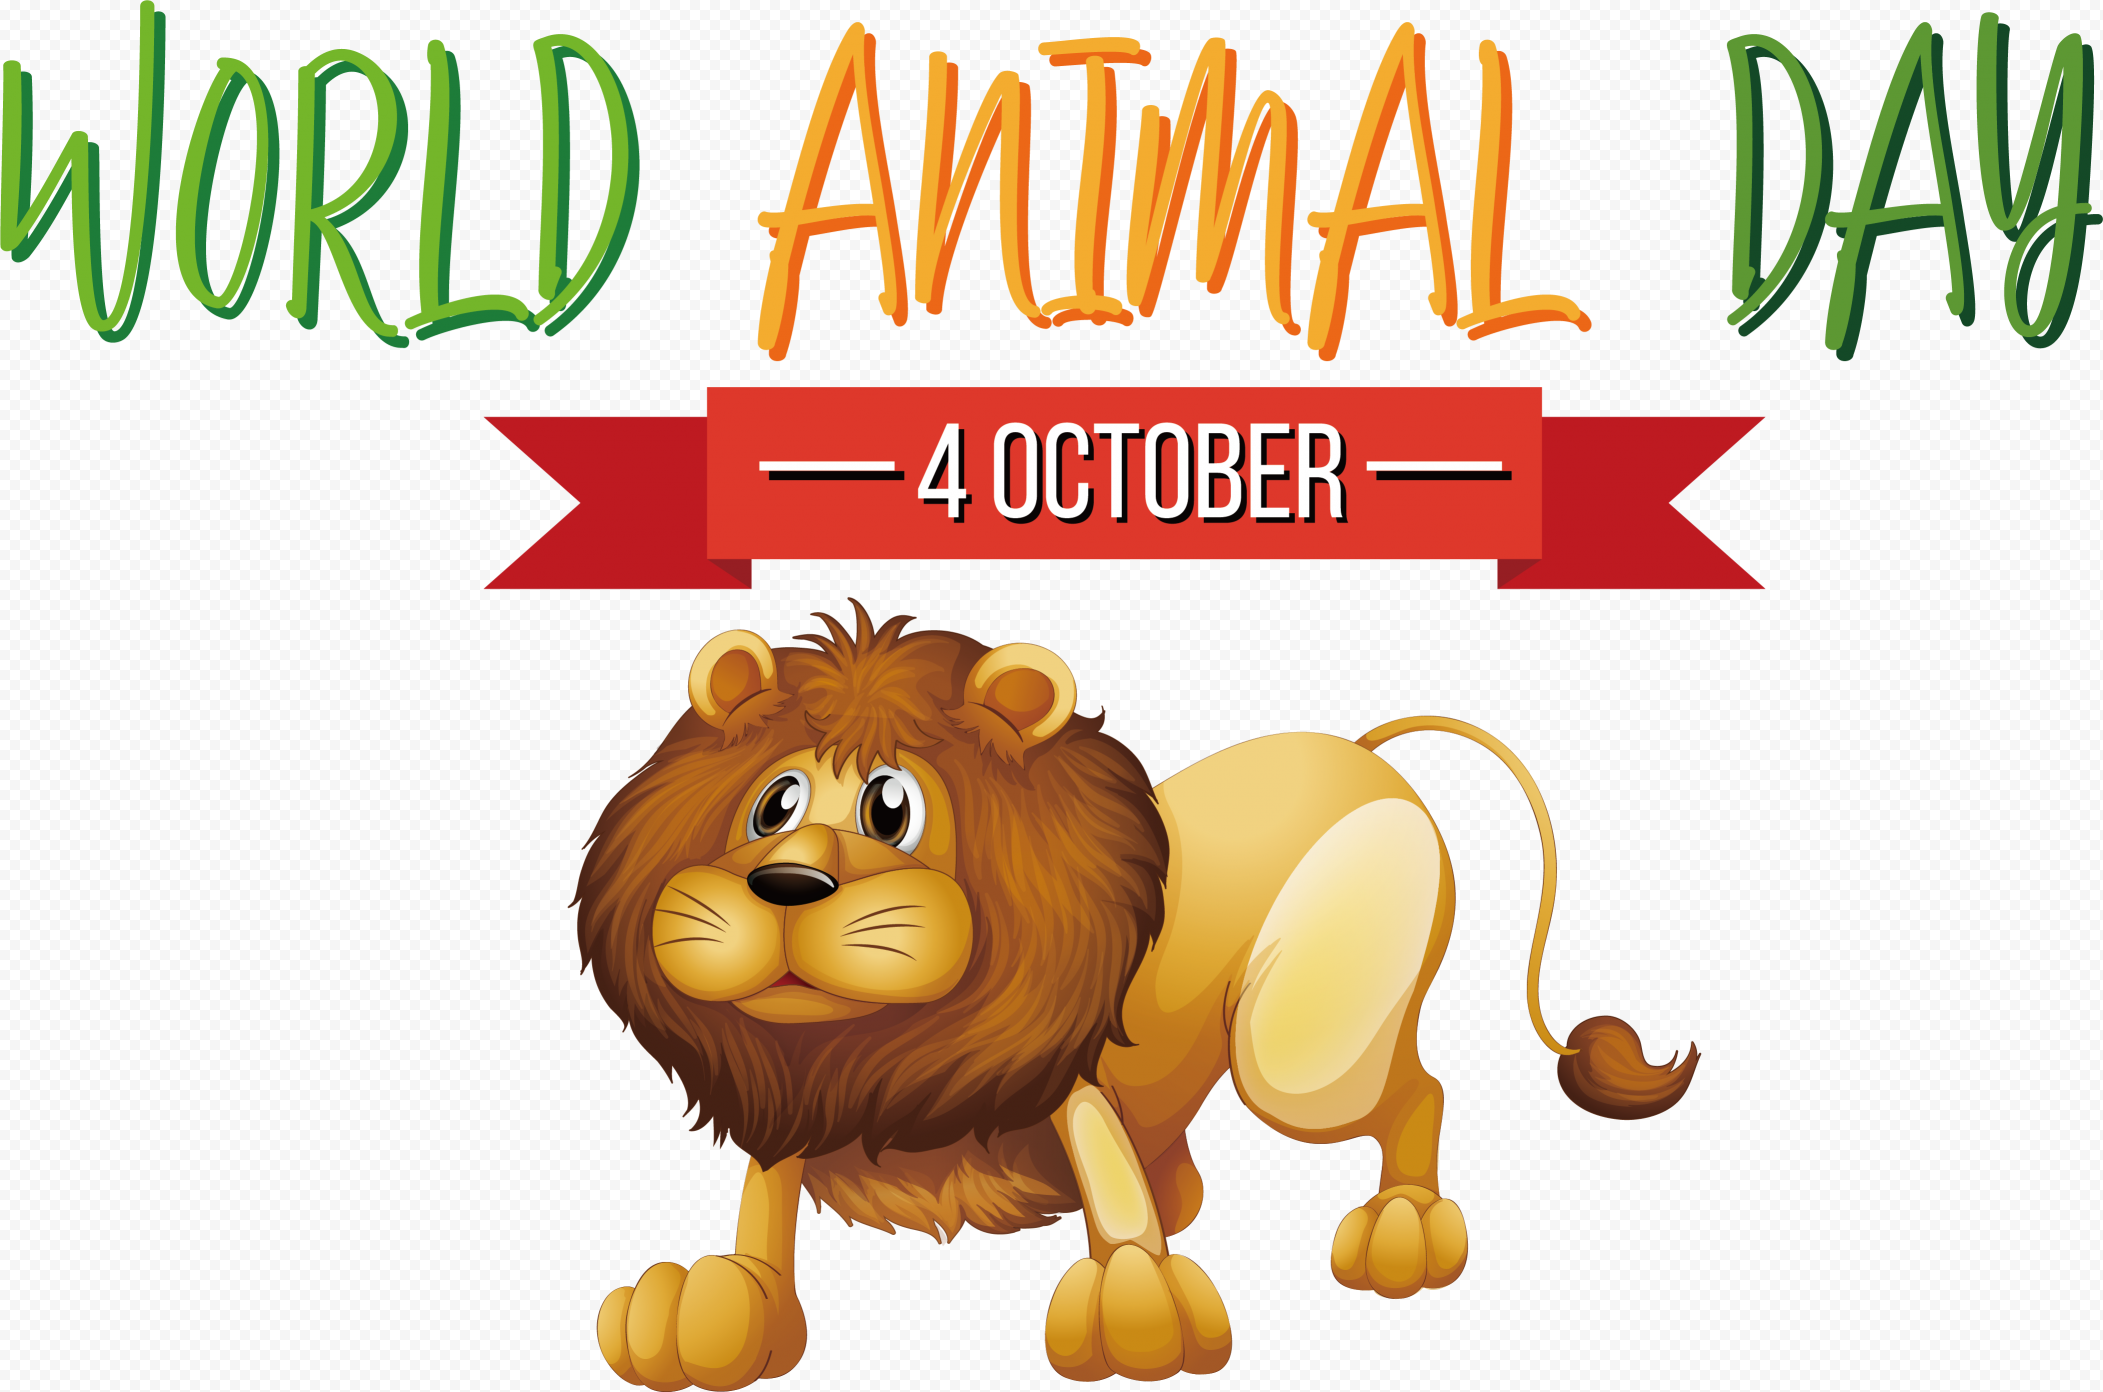 4 October World animal day png